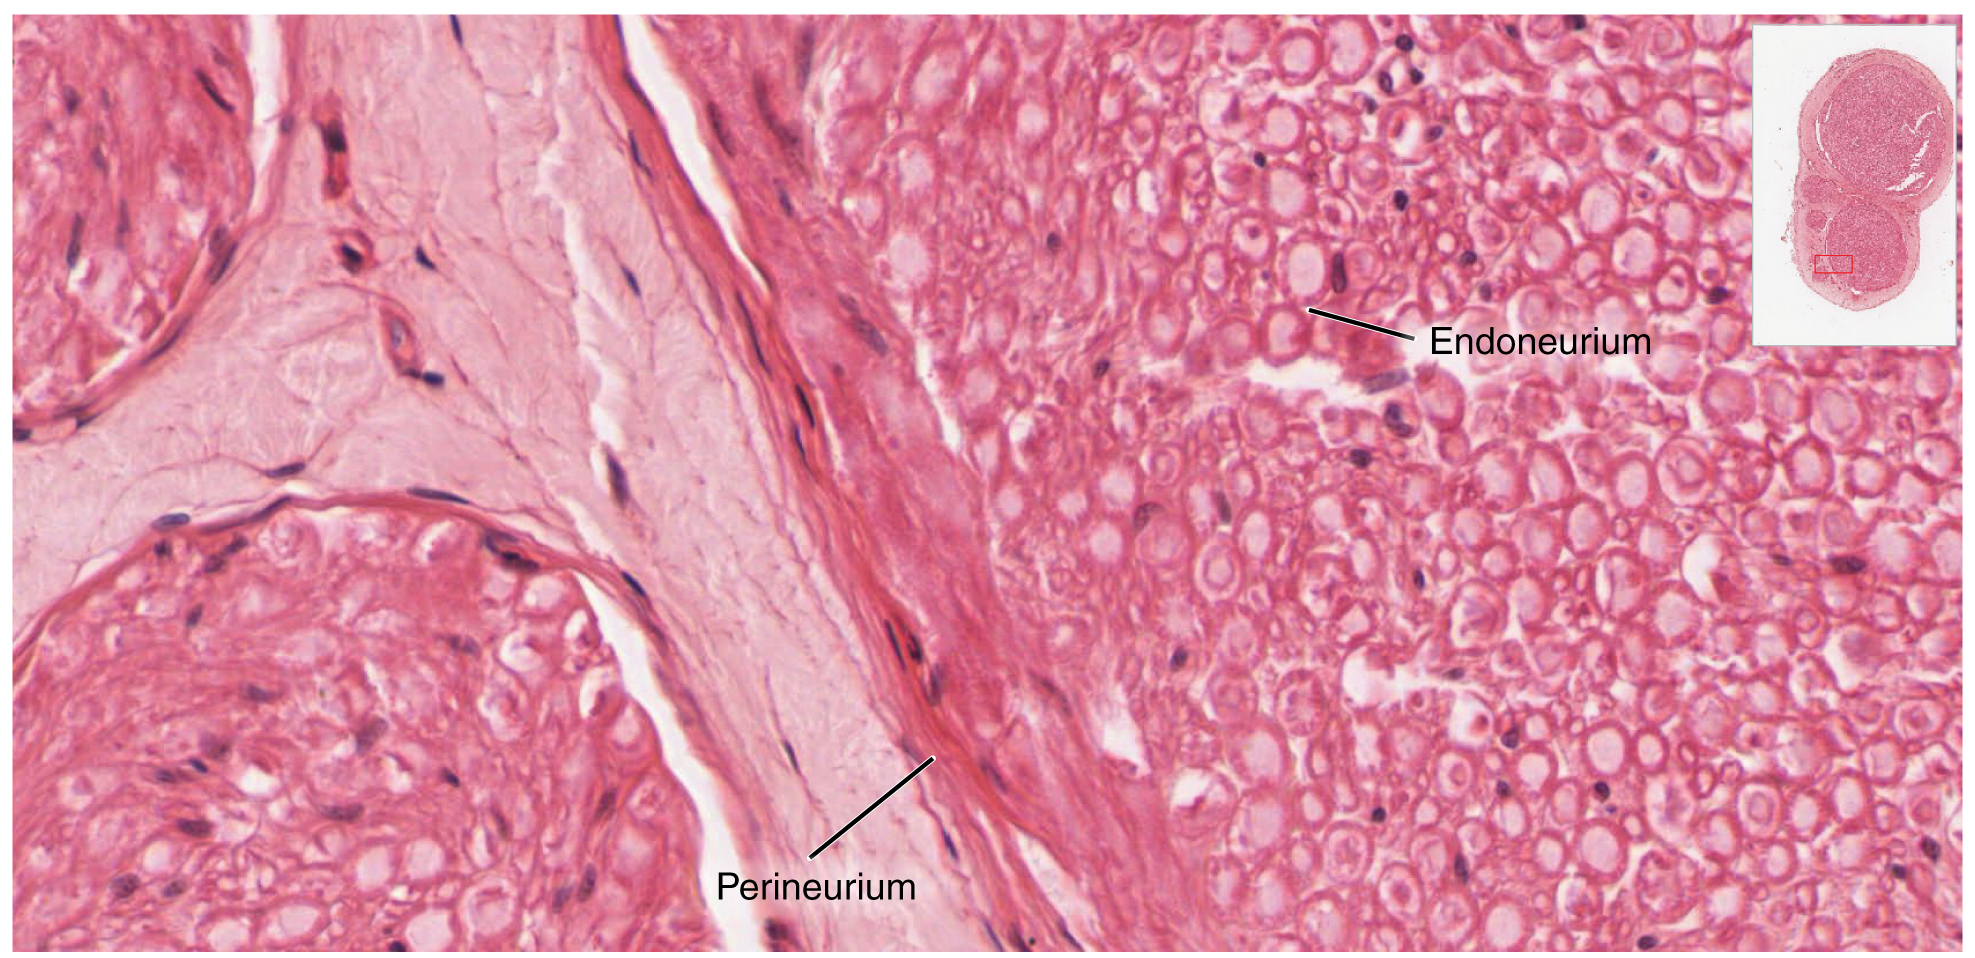 This micrograph shows a magnified view of the nerve. The perineurium